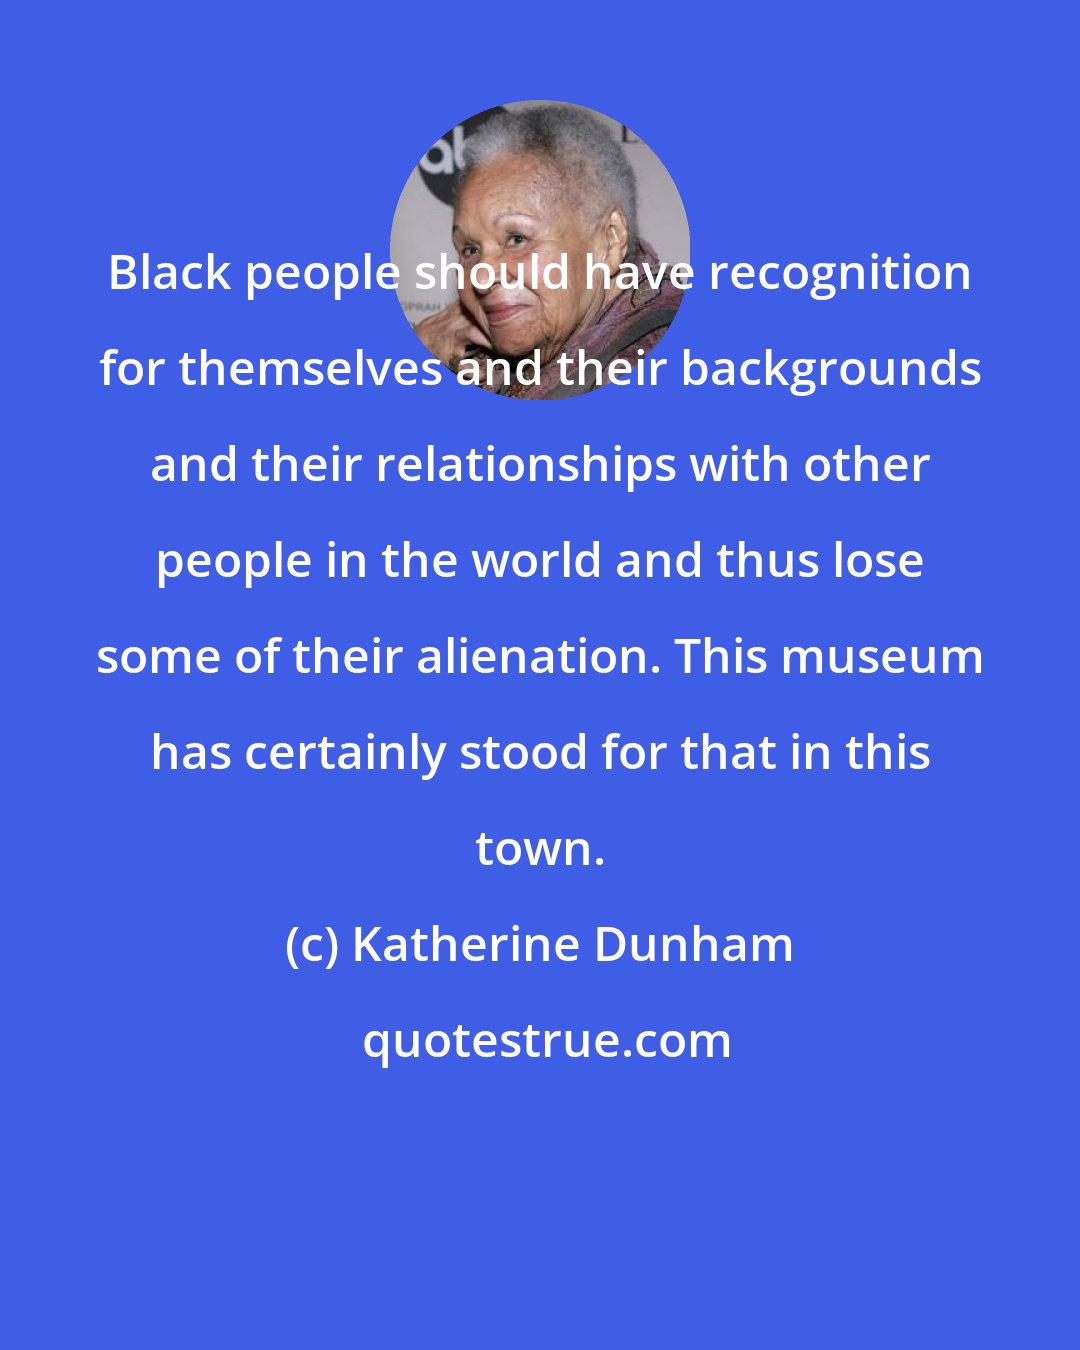 Katherine Dunham: Black people should have recognition for themselves and their backgrounds and their relationships with other people in the world and thus lose some of their alienation. This museum has certainly stood for that in this town.